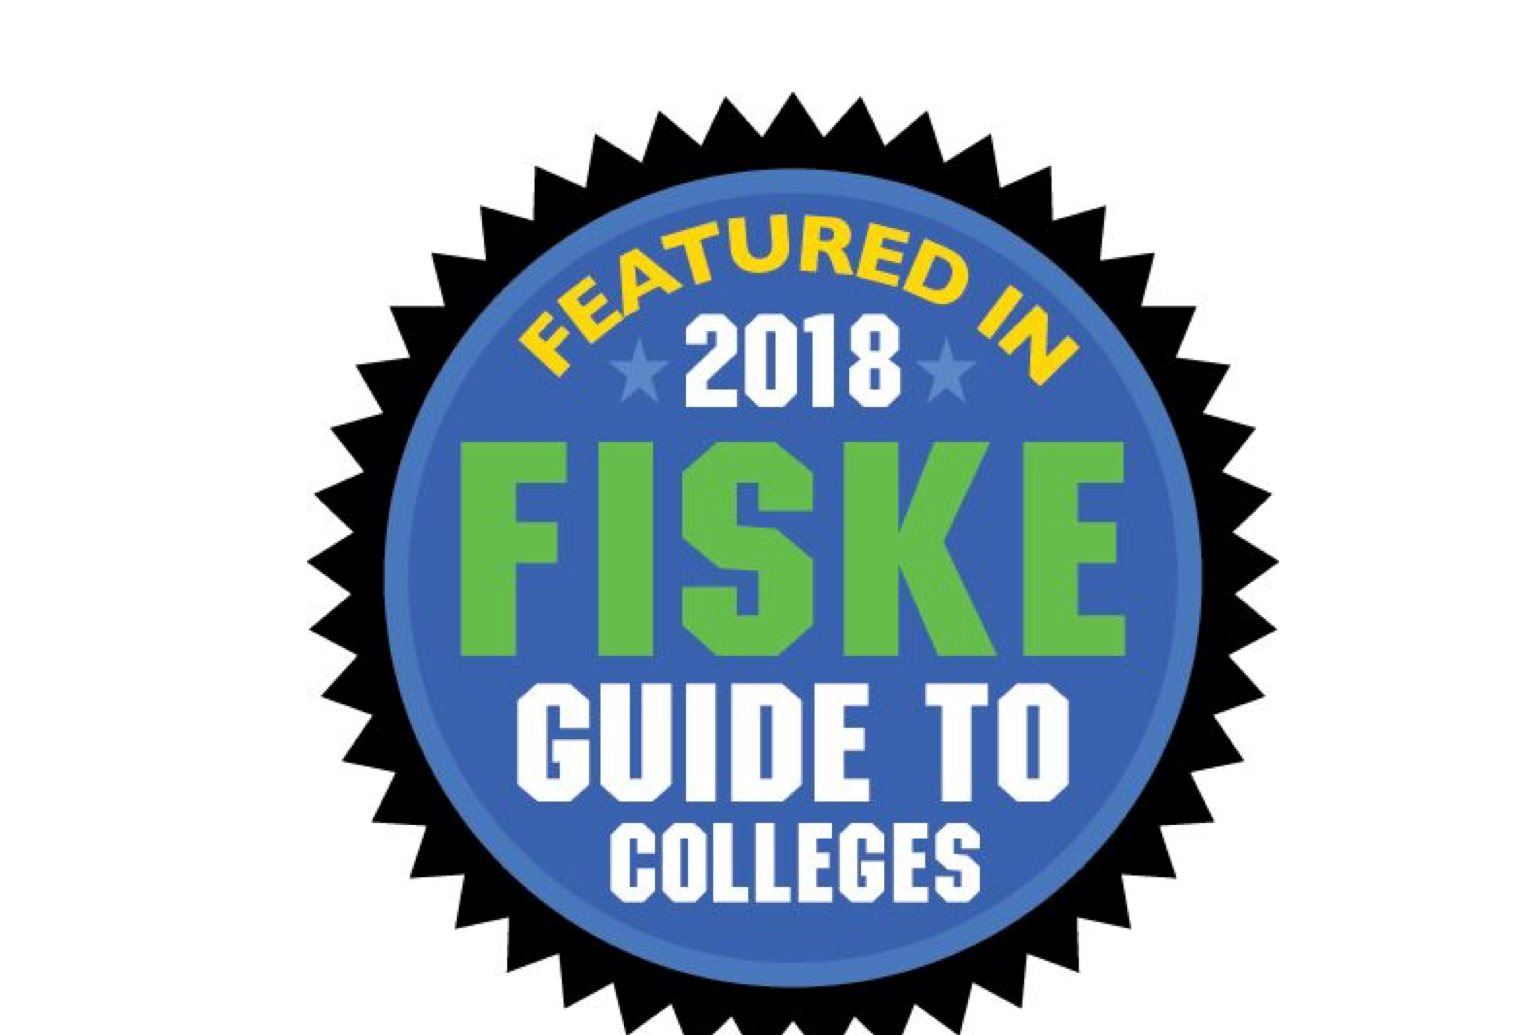 Fiske Guide to Colleges highlights Elon's global perspective and